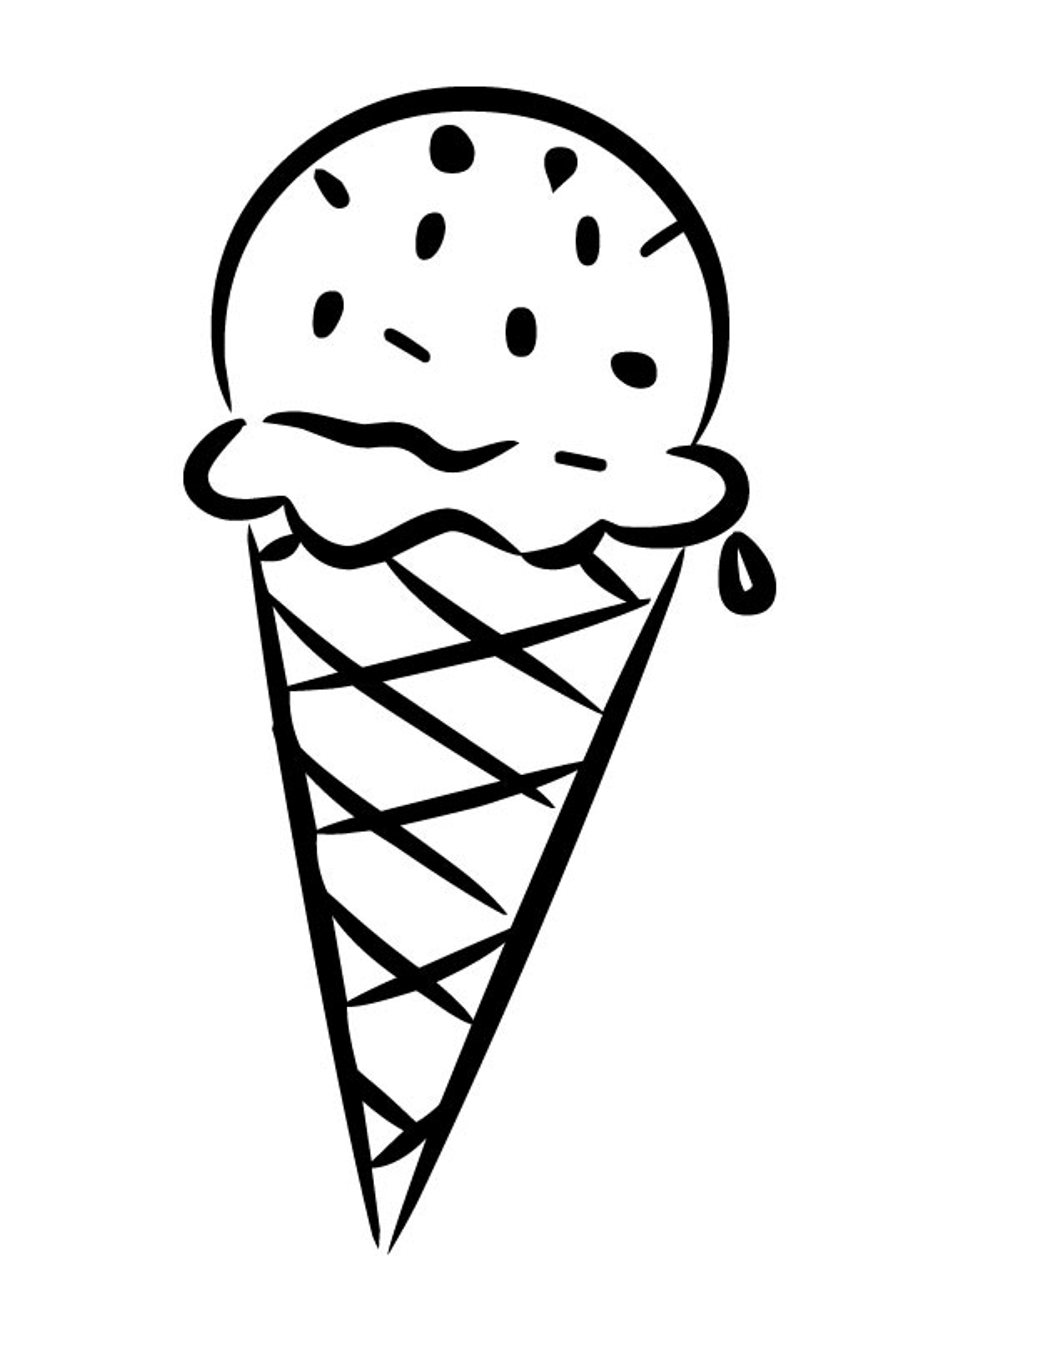 Ice Cream Cone Coloring Page - ClipArt Best